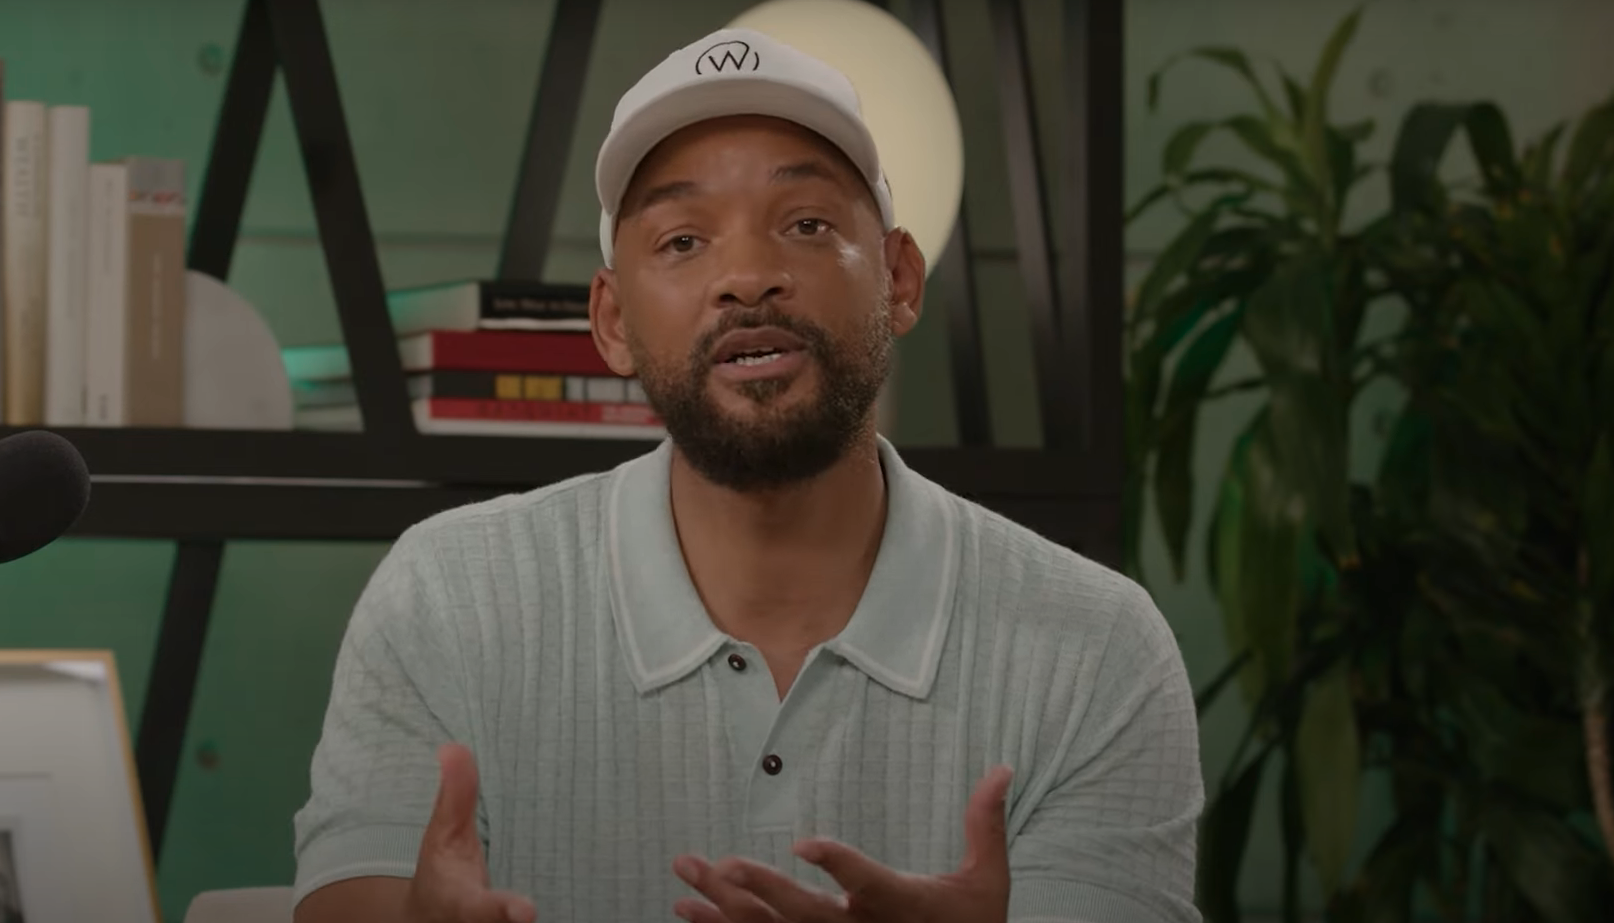 A screenshot of Will Smith from his Oscars slap apology video